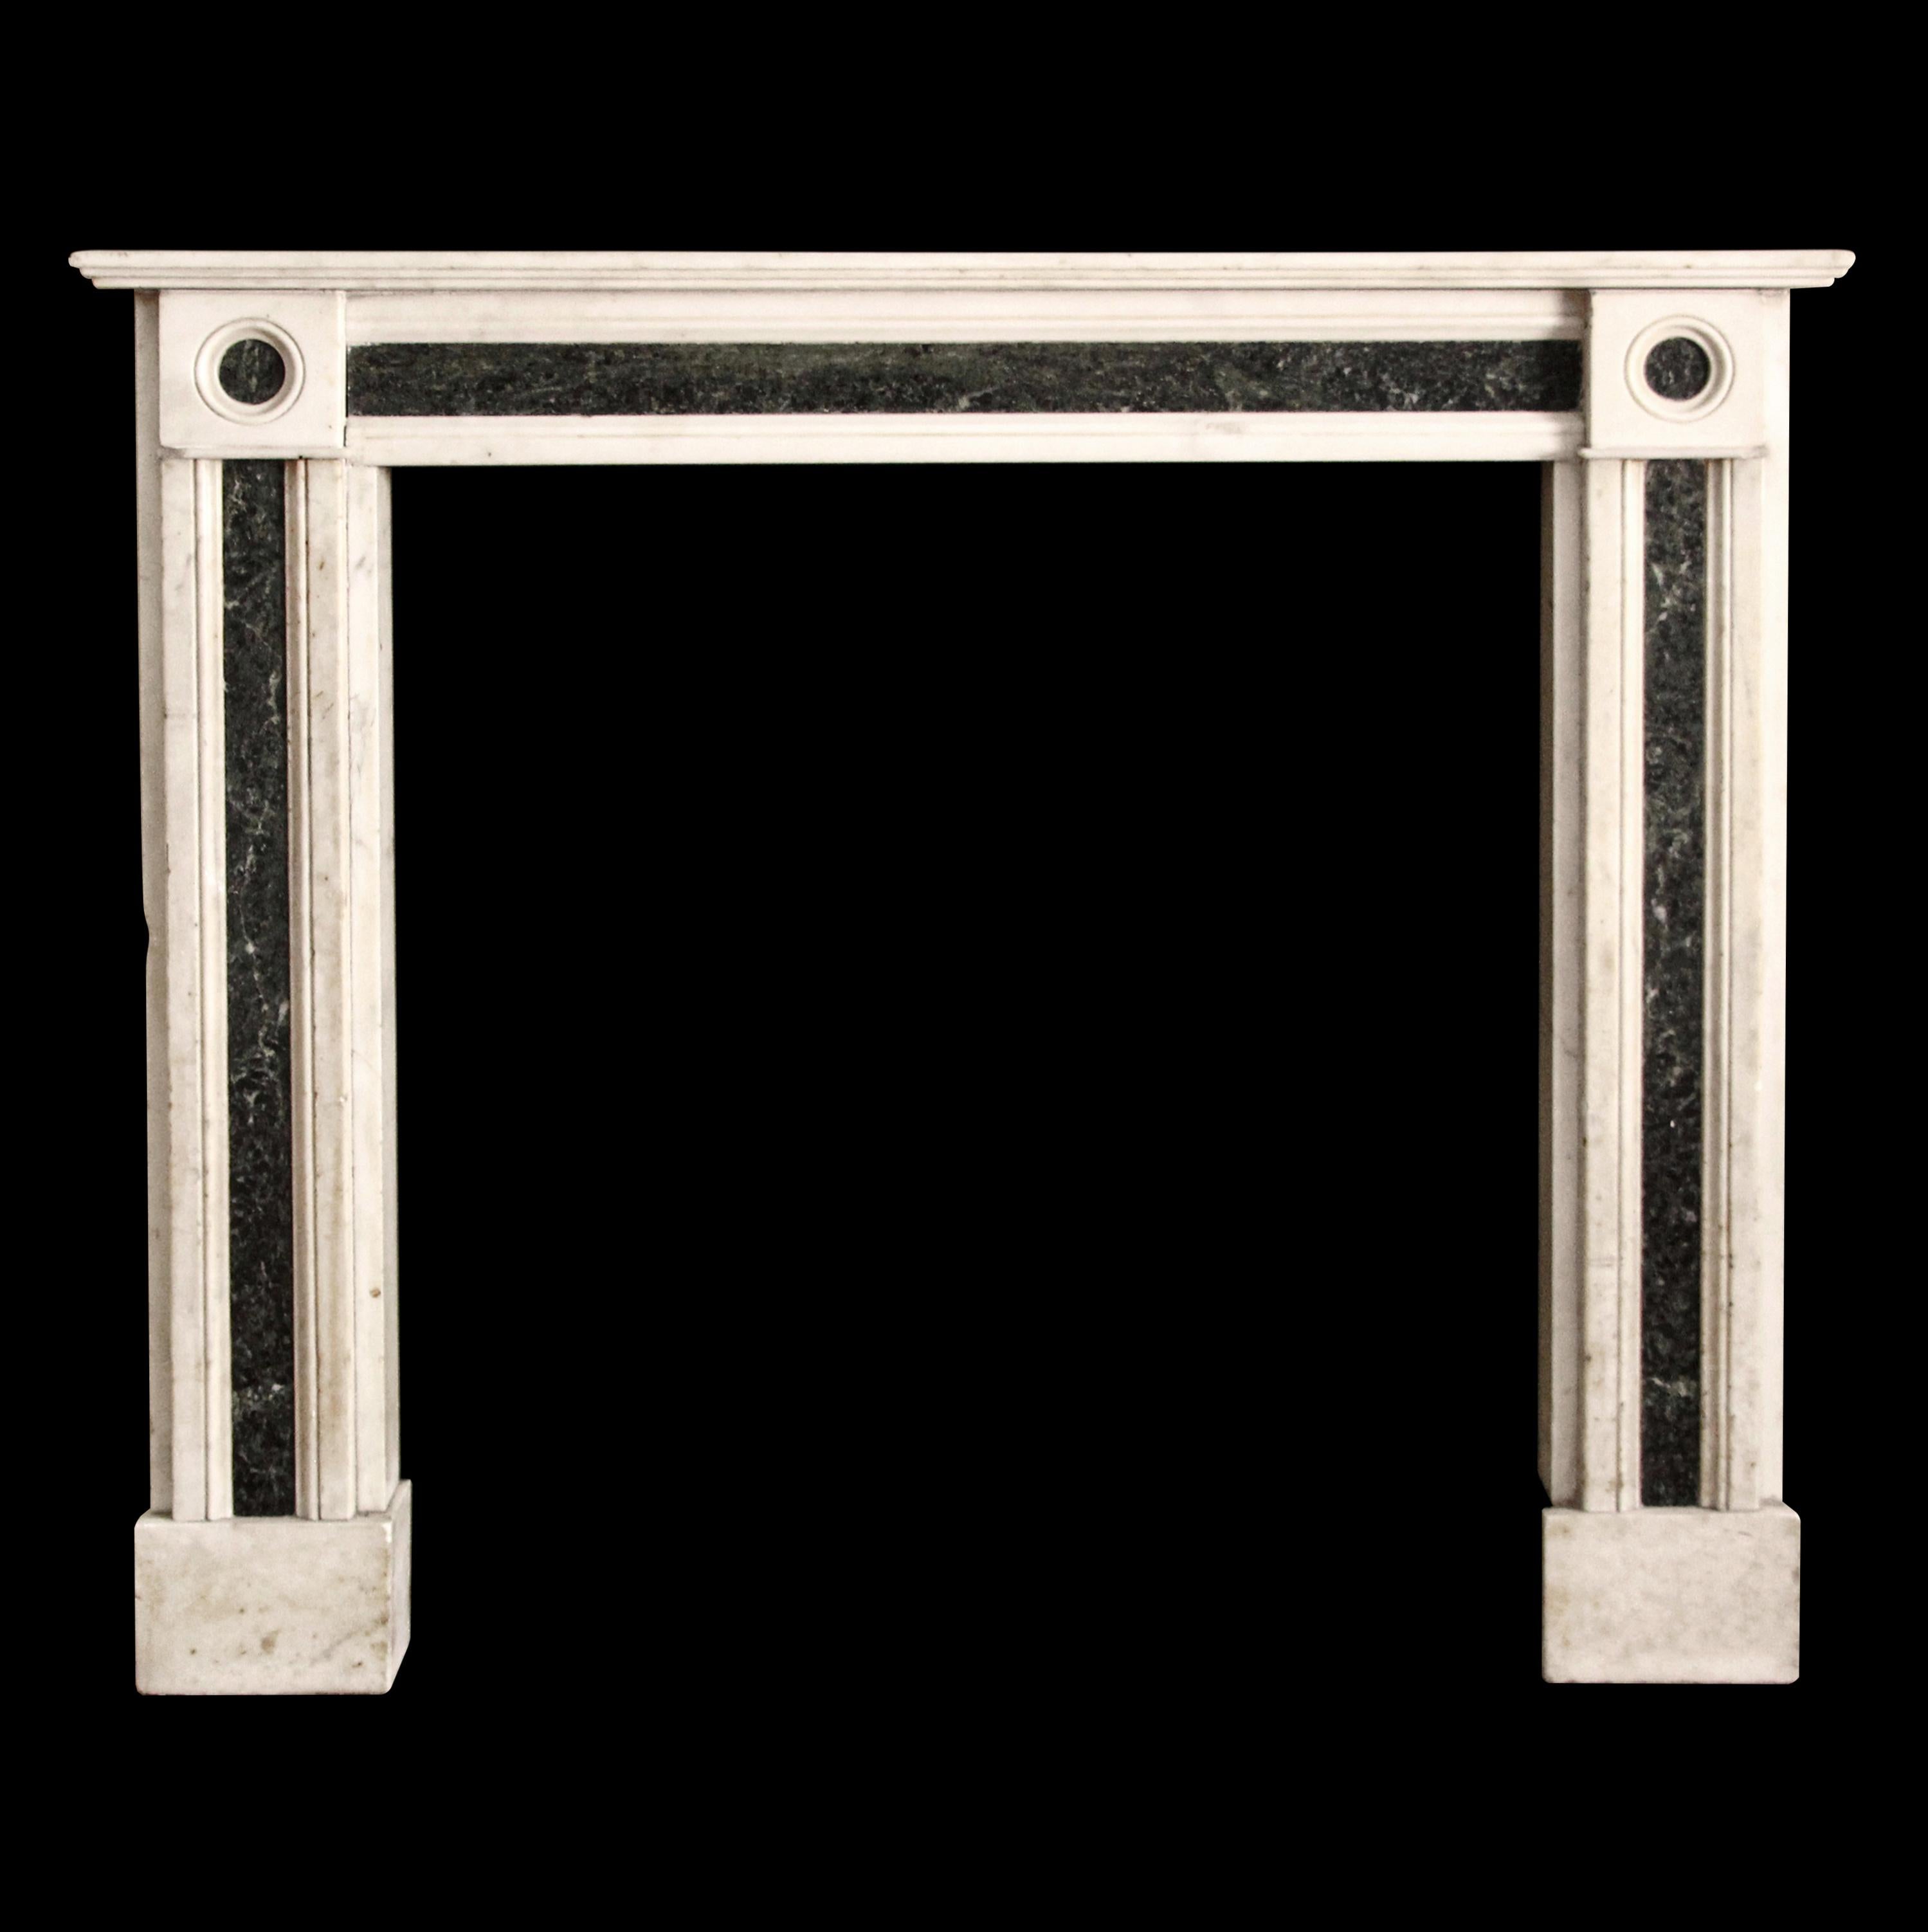 Hearth not included. Early 19th century English Regency marble mantel with deep green inlay. Simple yet decorative rondels grace the pilasters on the top both sides. This mantel was one of a group of antique mantels imported from Europe and